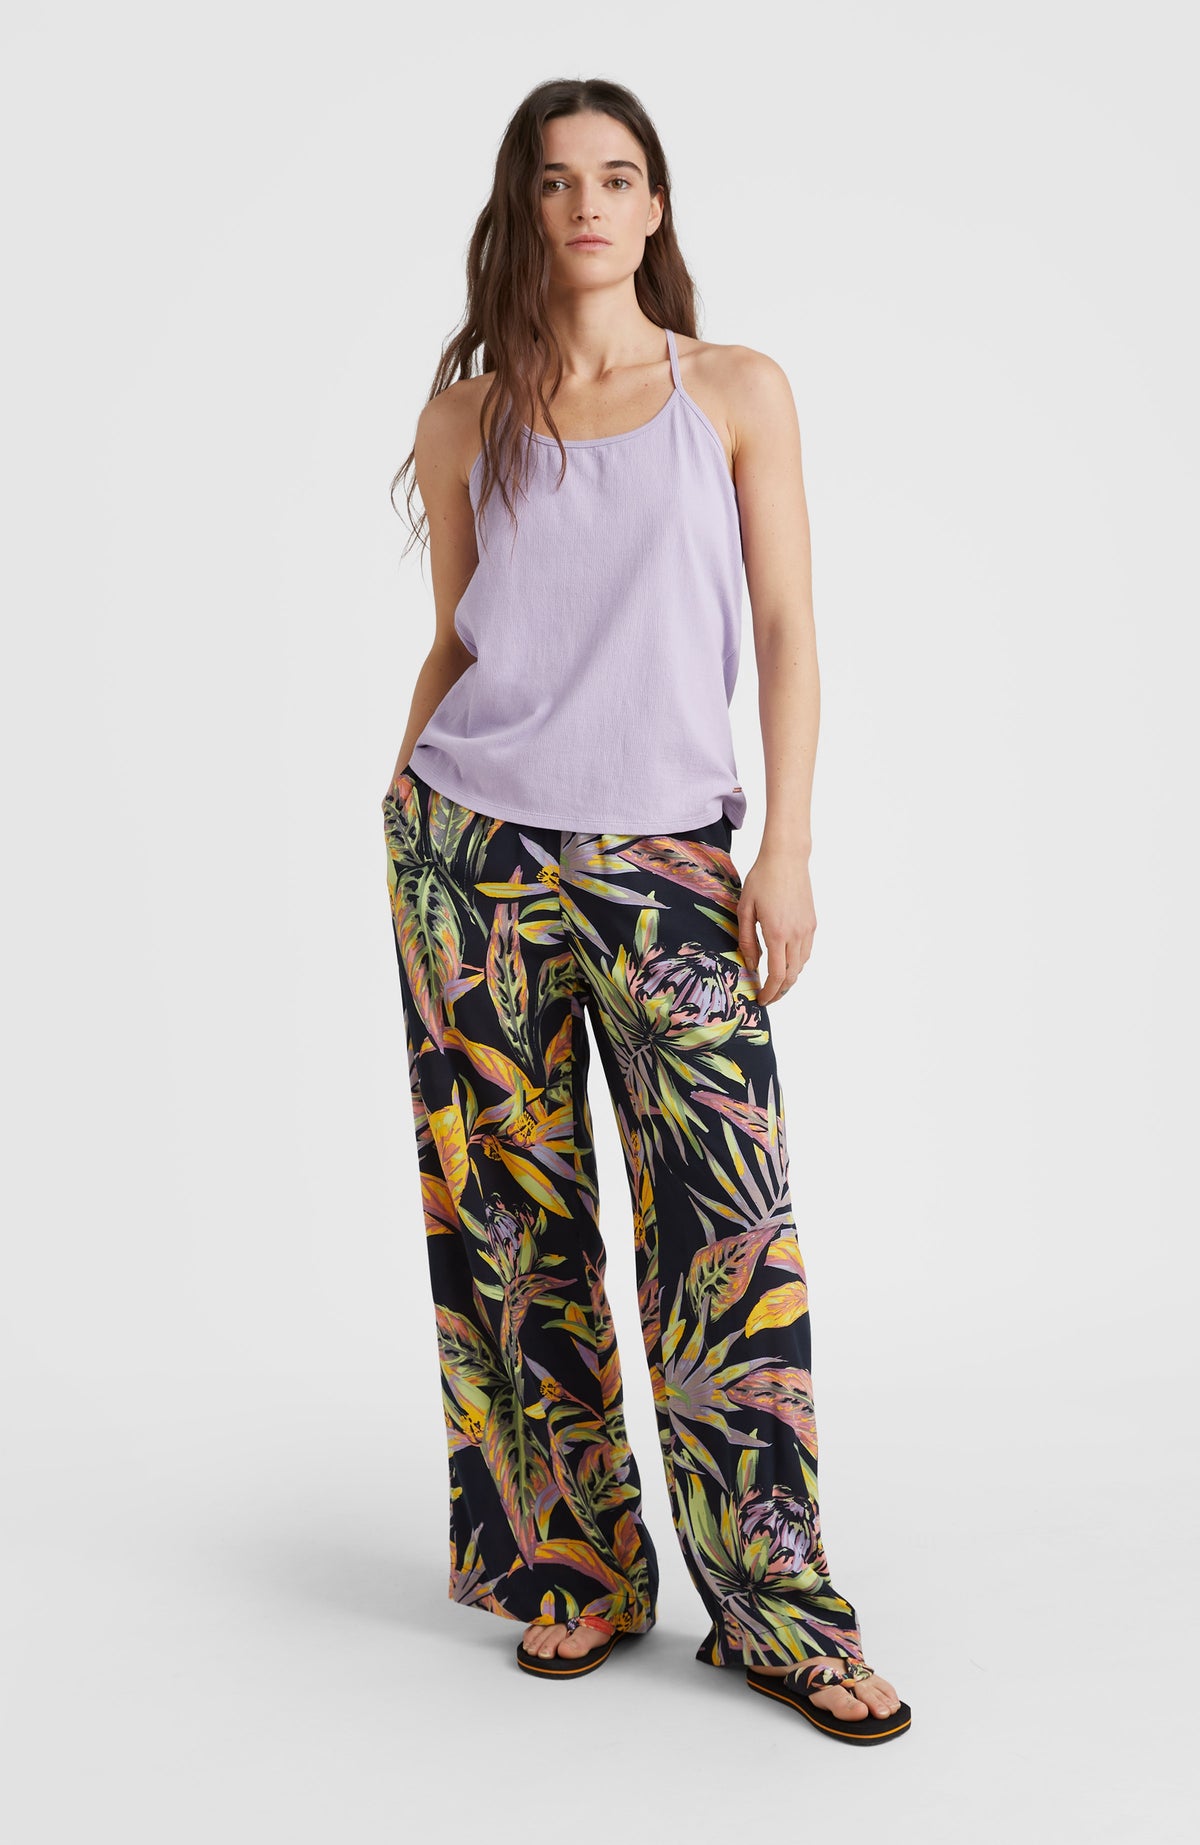 Pieces Lala Floral Print Trousers in Black | iCLOTHING - iCLOTHING